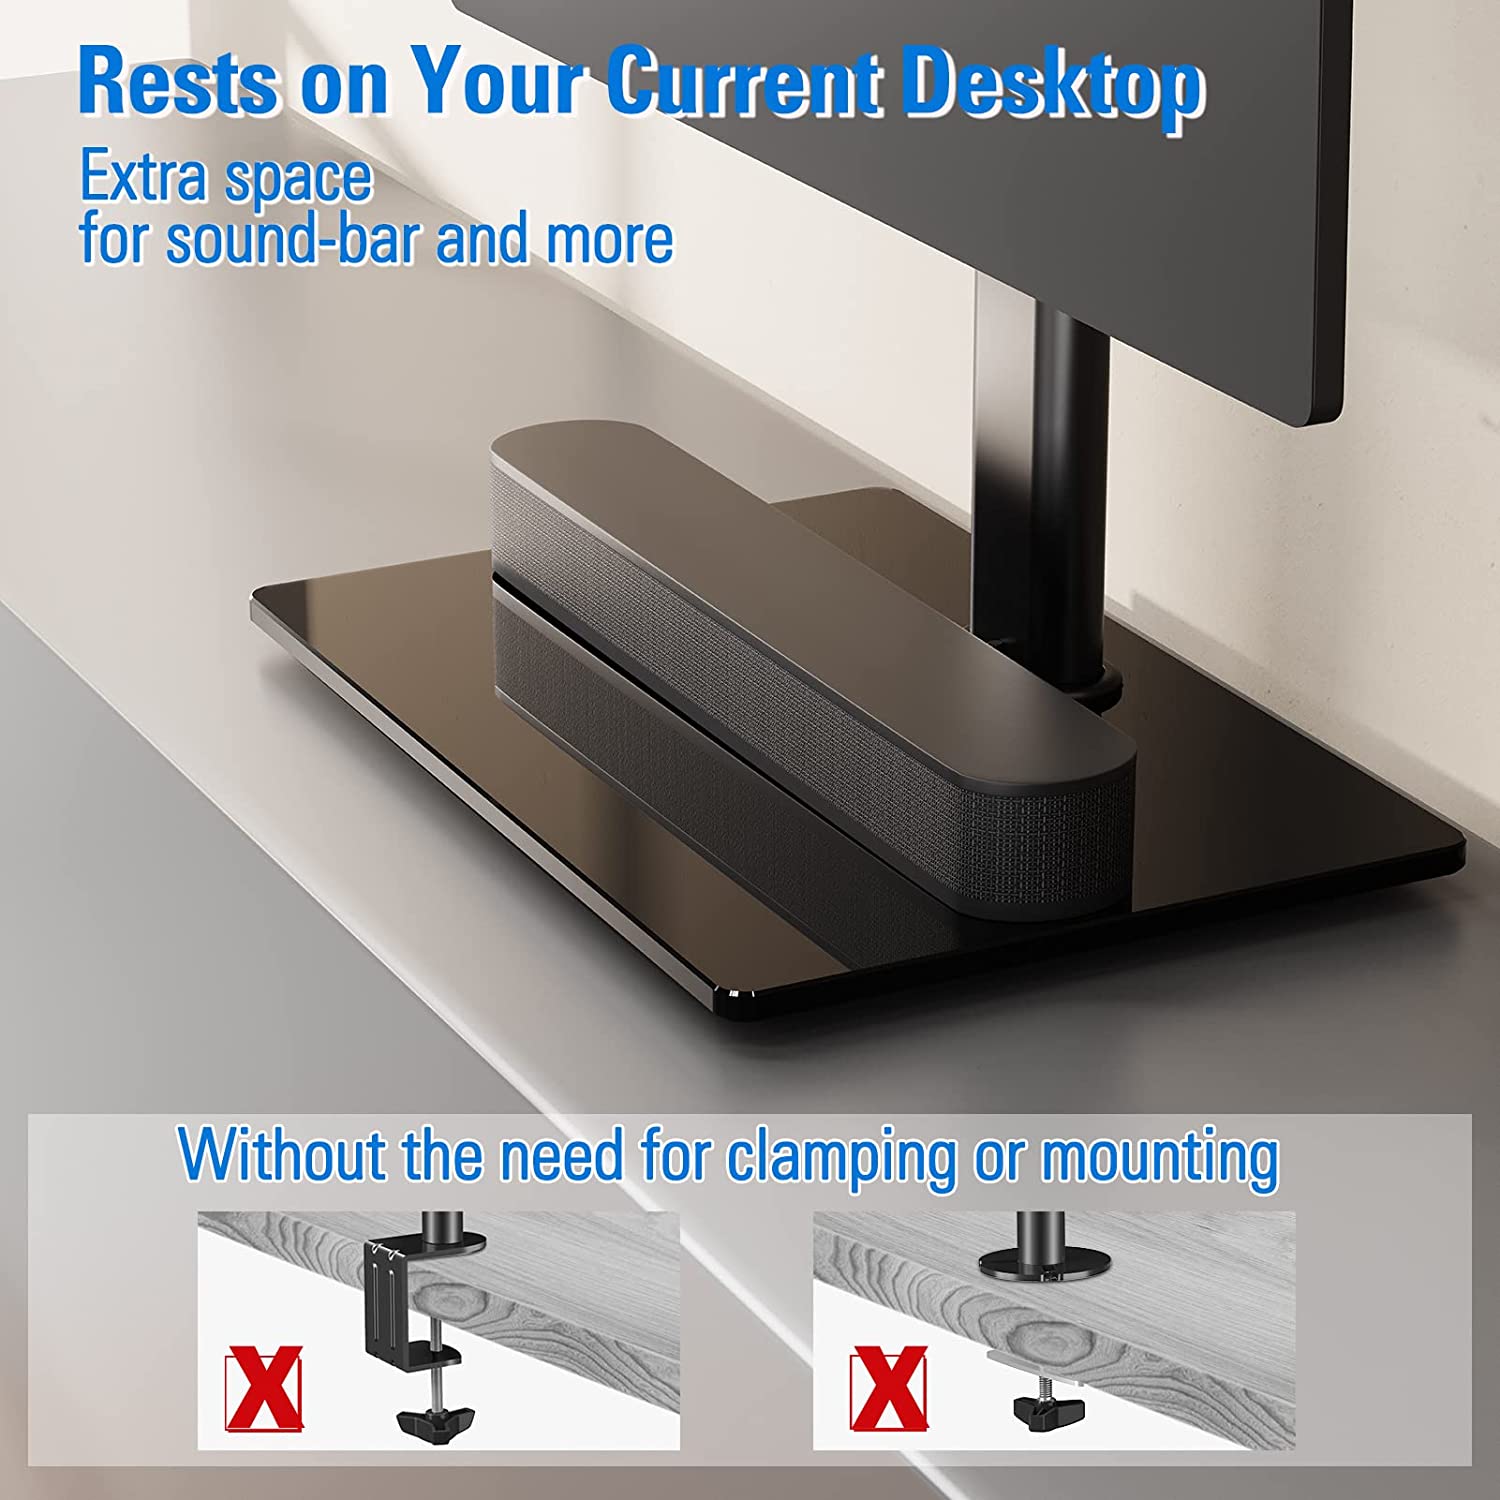 freestanding monitor stand with no need of clamping or drilling holes